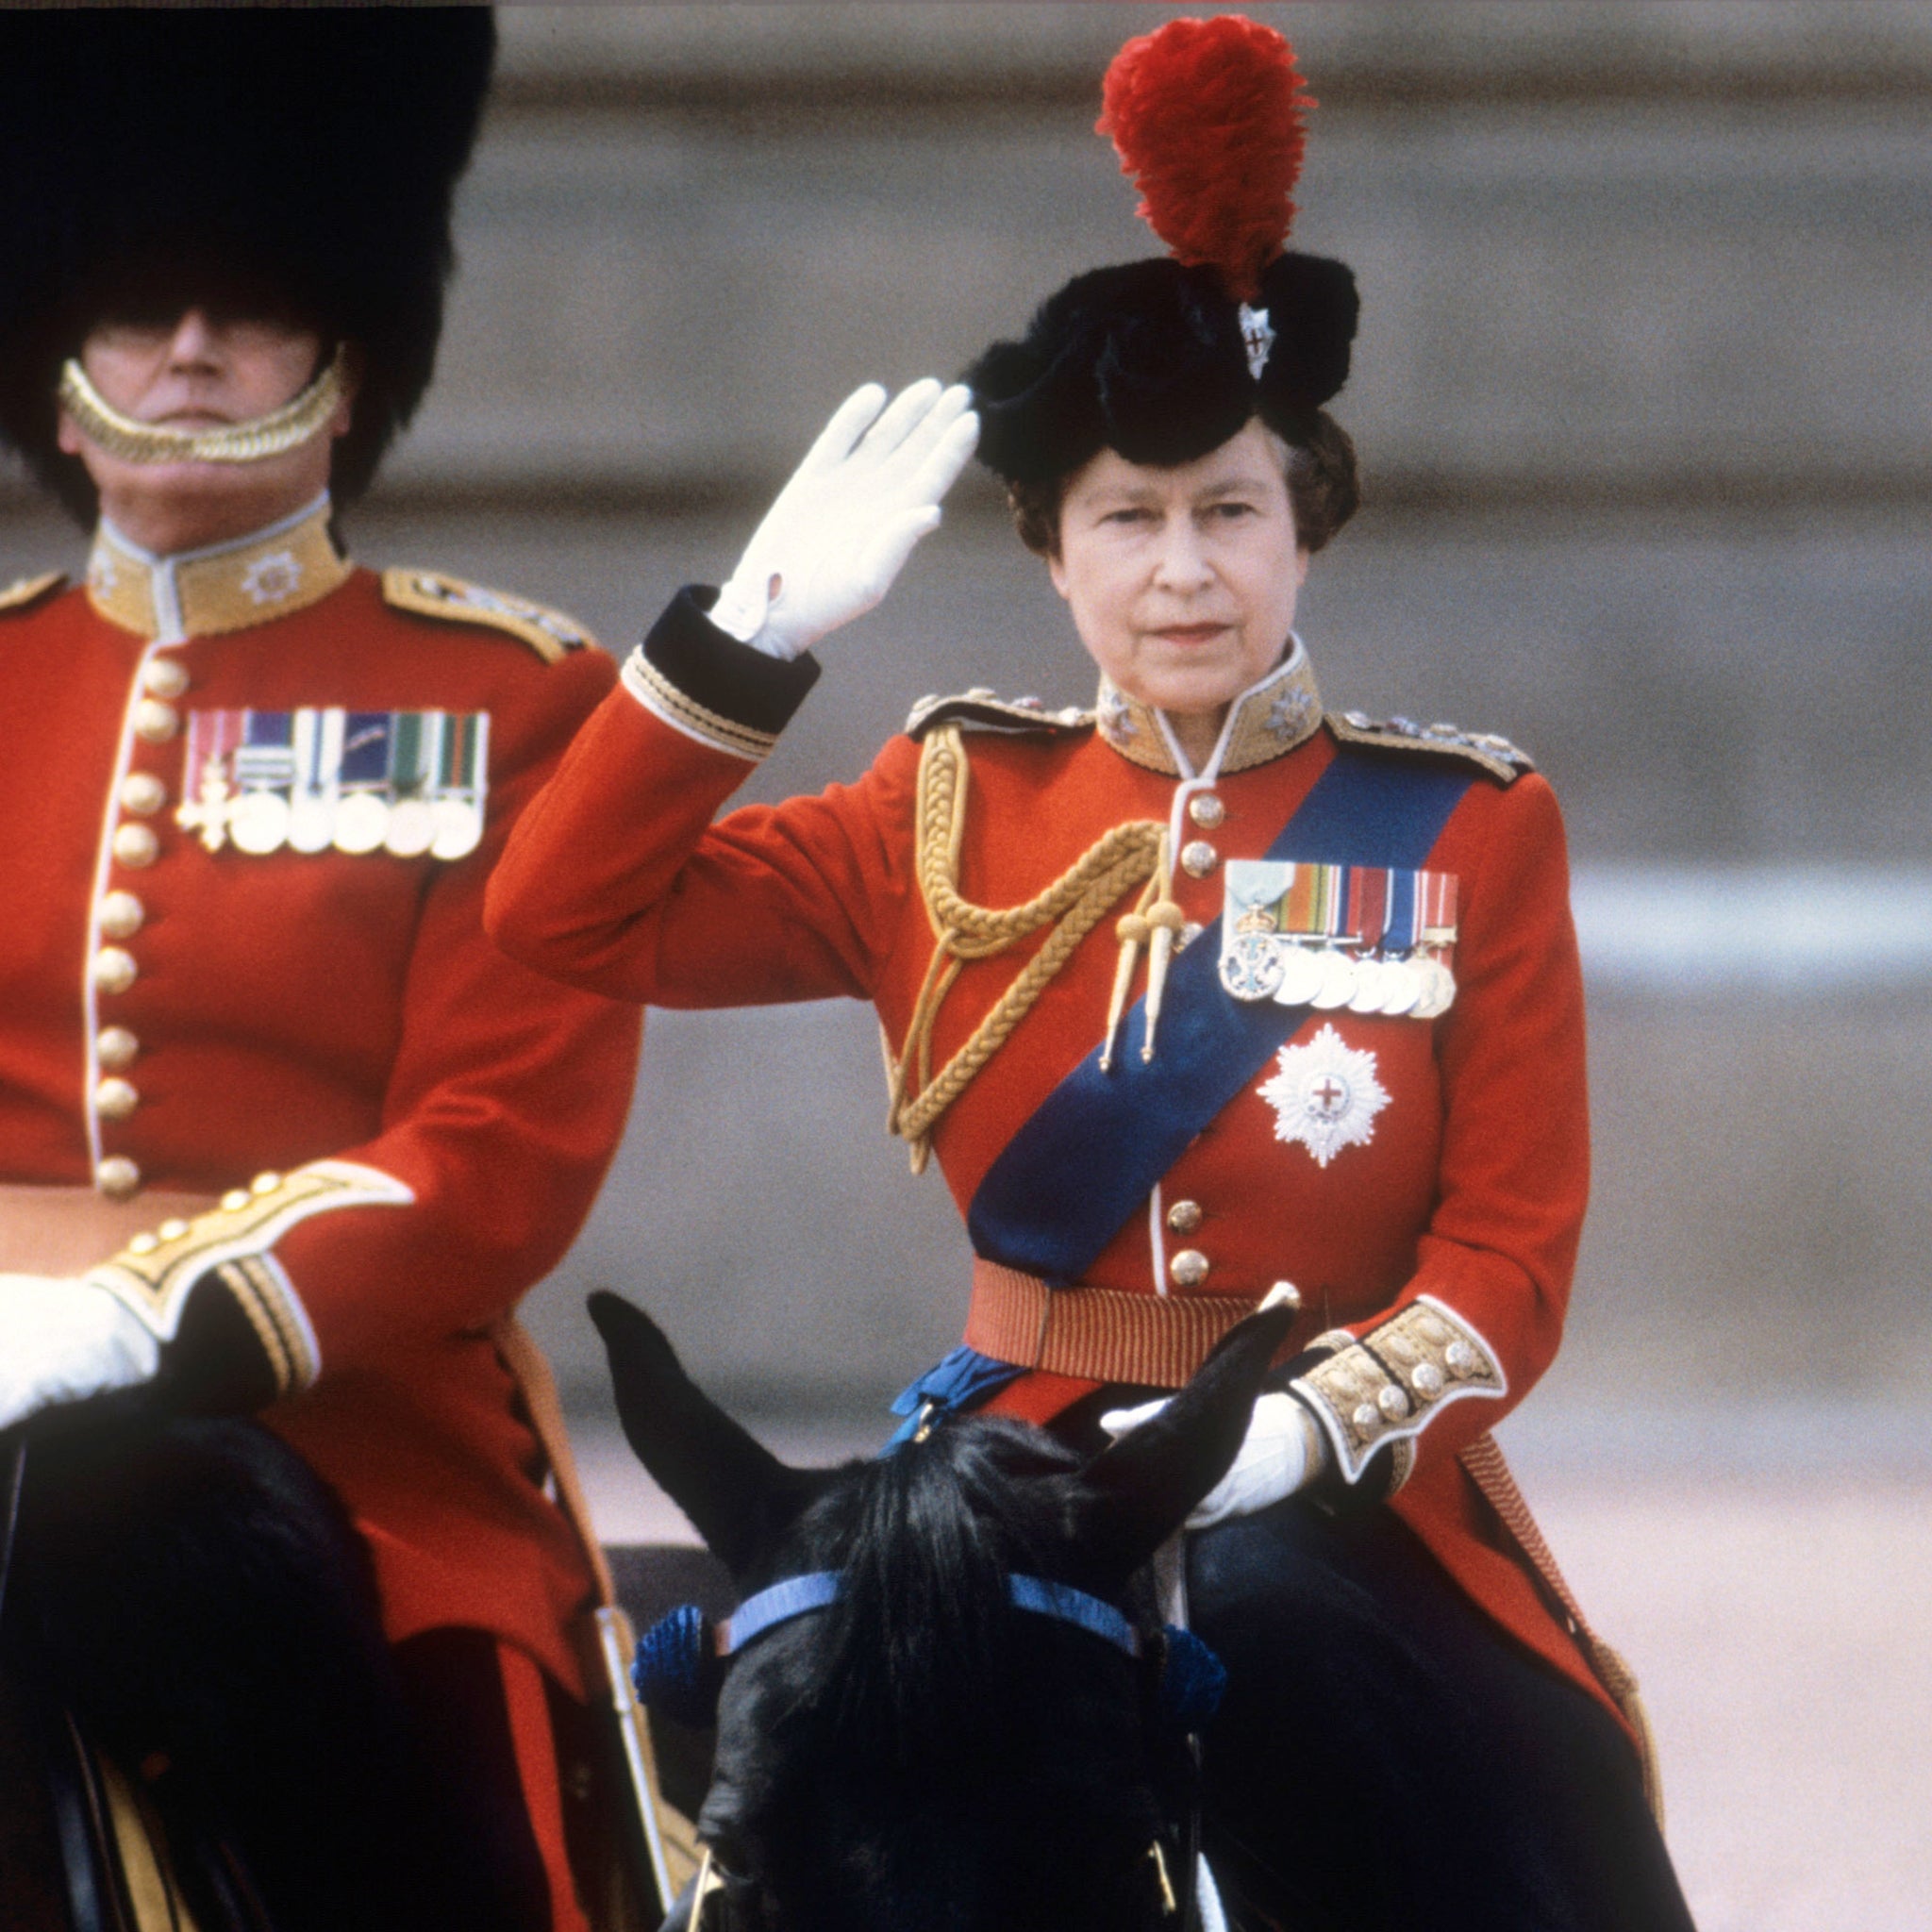 Queen Elizabeth II taking the salute of the Household Guards regiments during the Trooping of the Colour ceremony in London, 1985